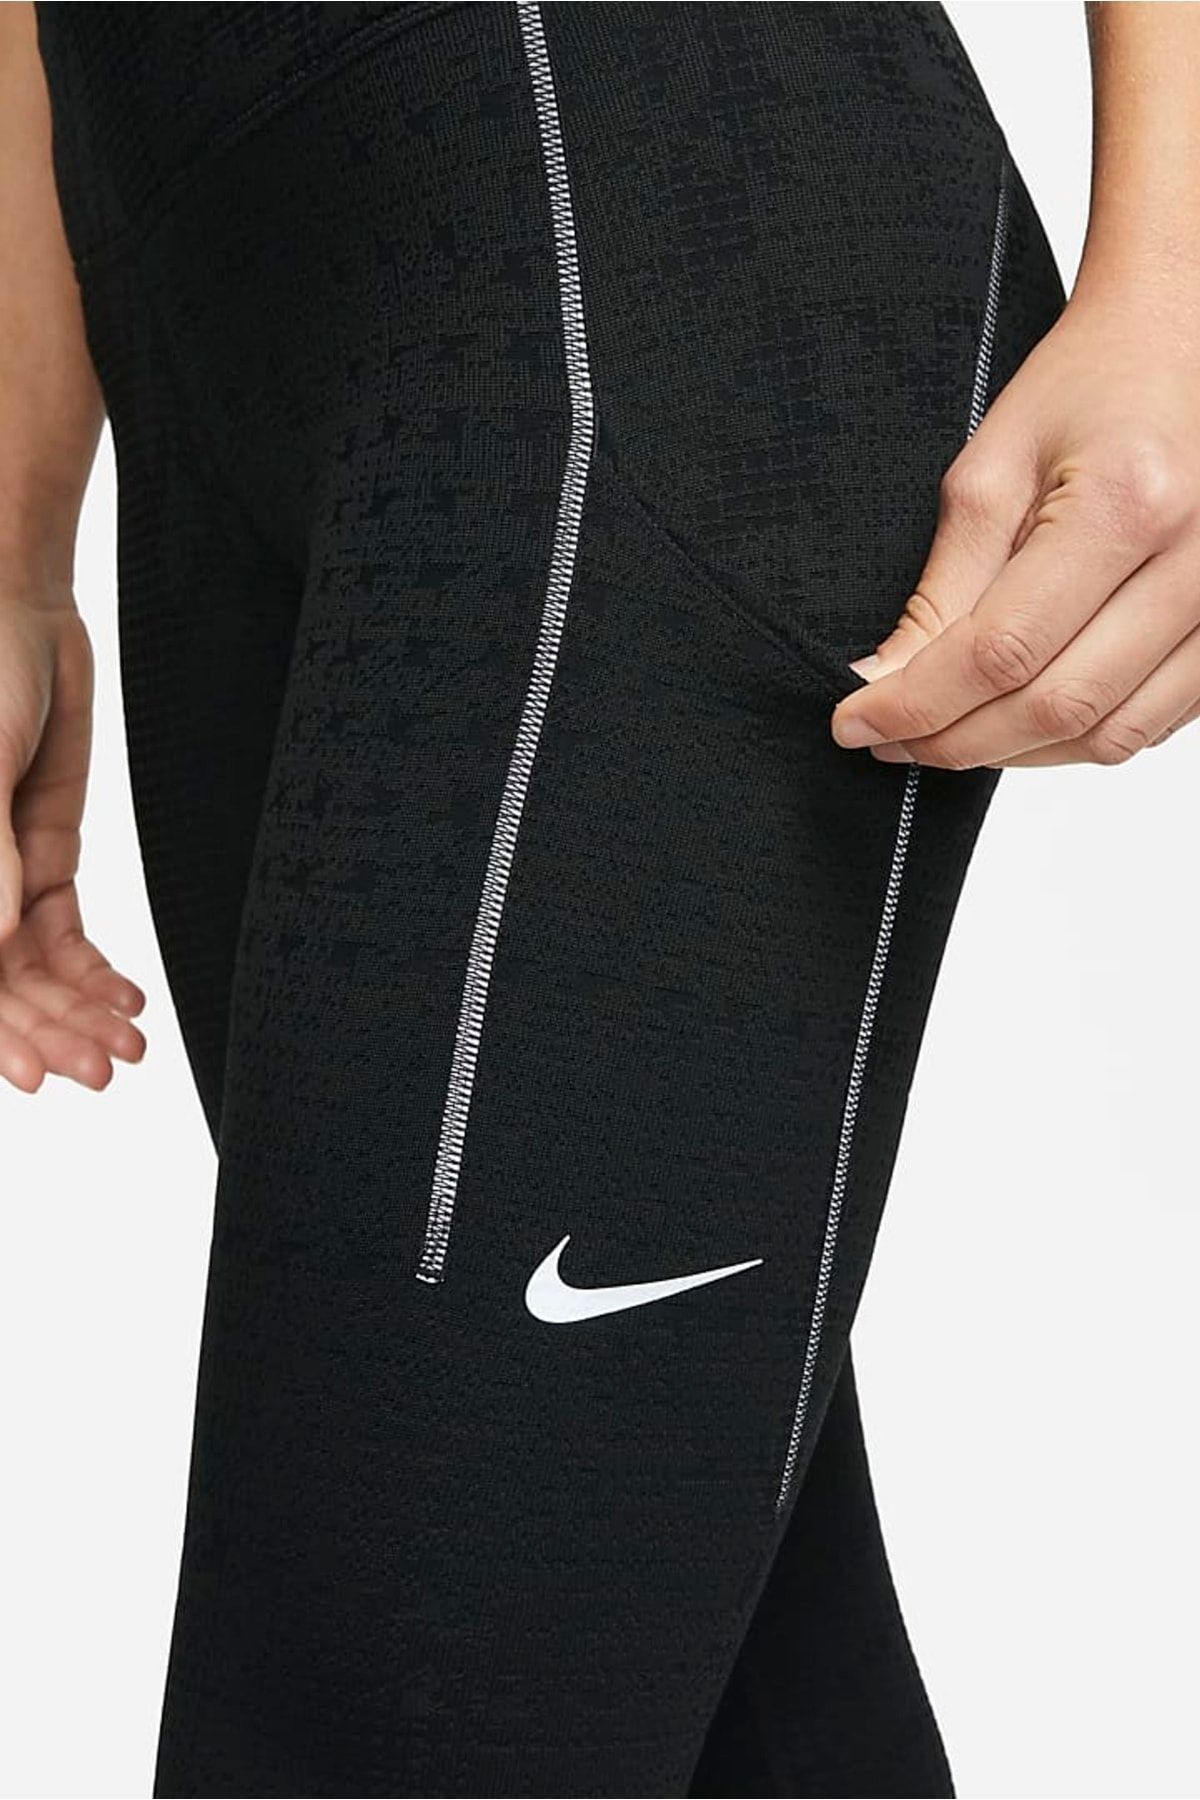 Nike Adv Epic Luxe Runnig Therma Fabric Black Strengthening Women's Sports  Tights - Trendyol